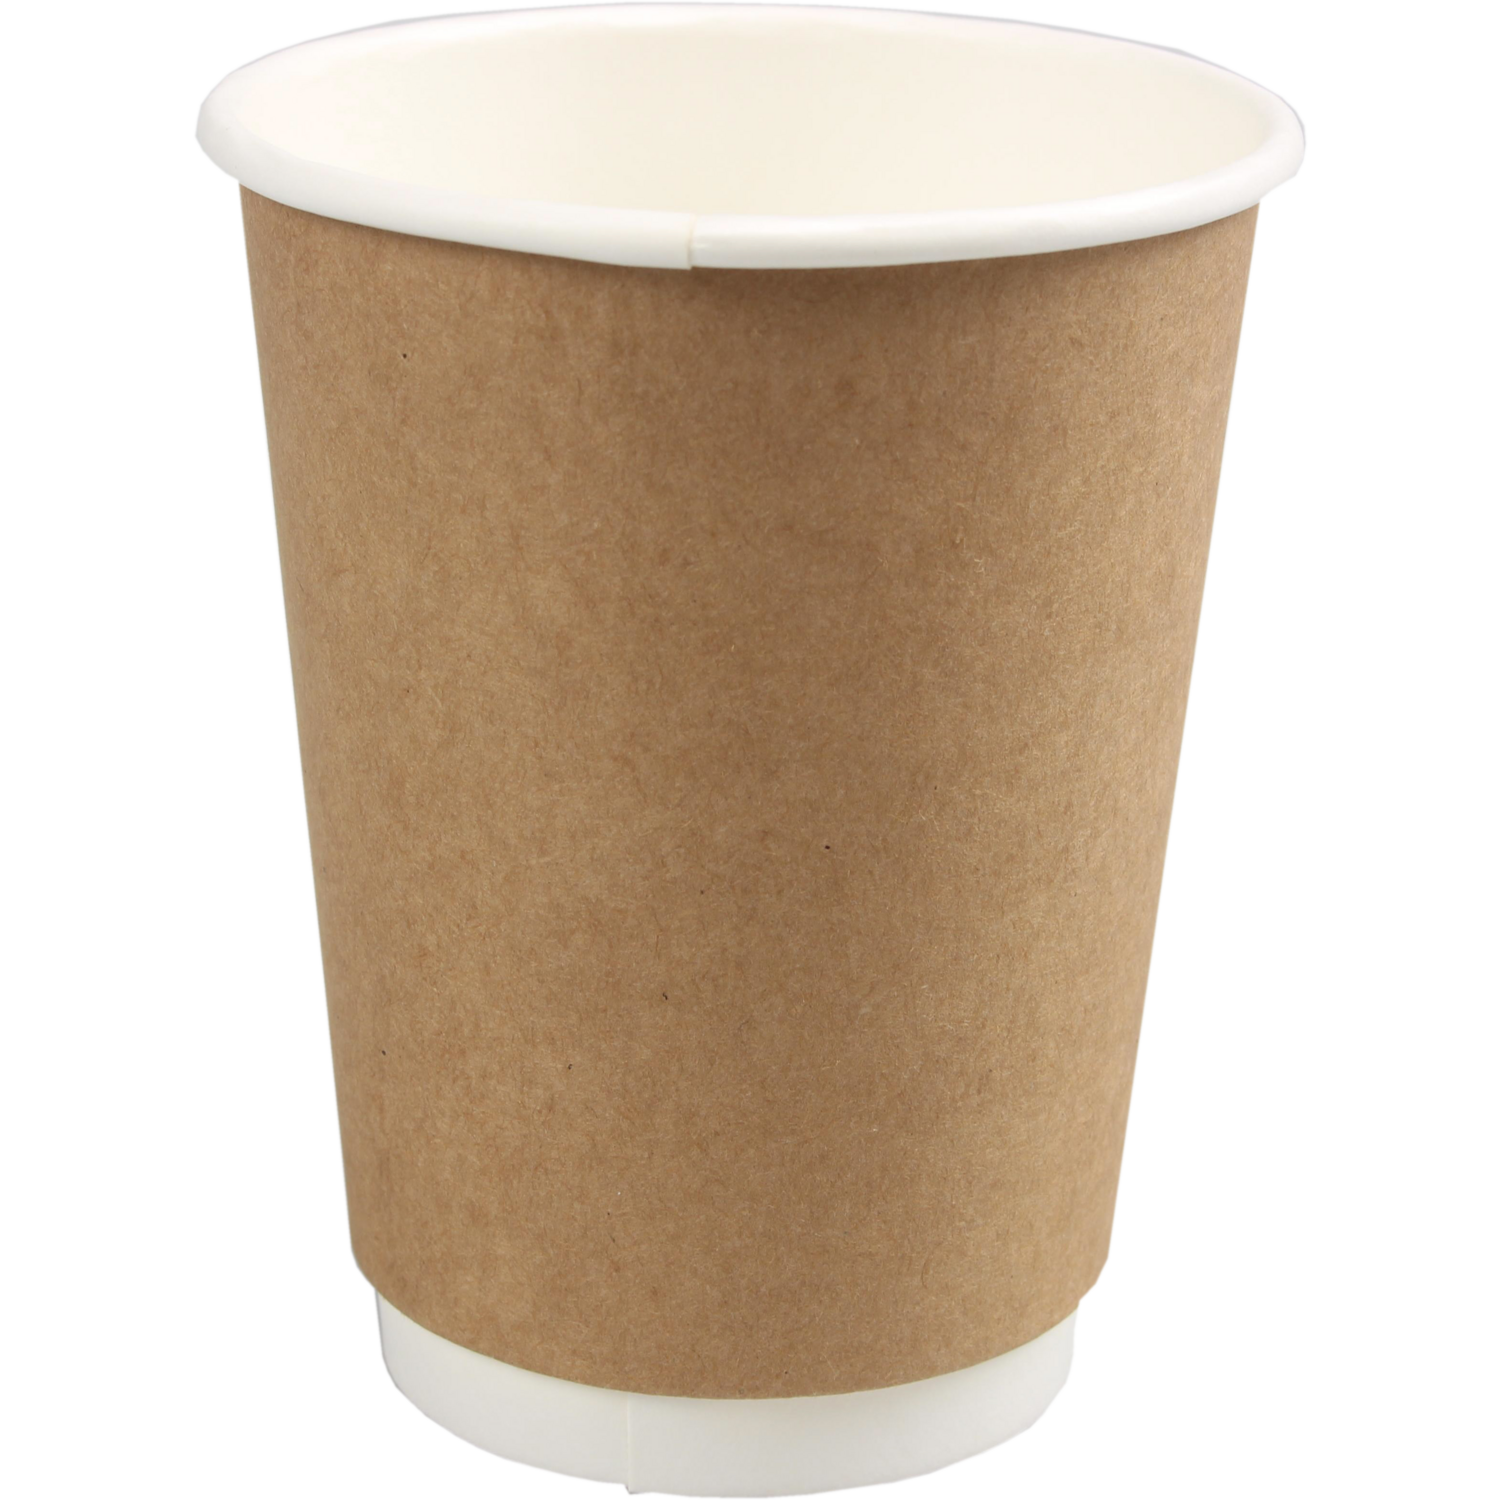  Double-walled cup, Paper, 8oz, 92mm, brown  1